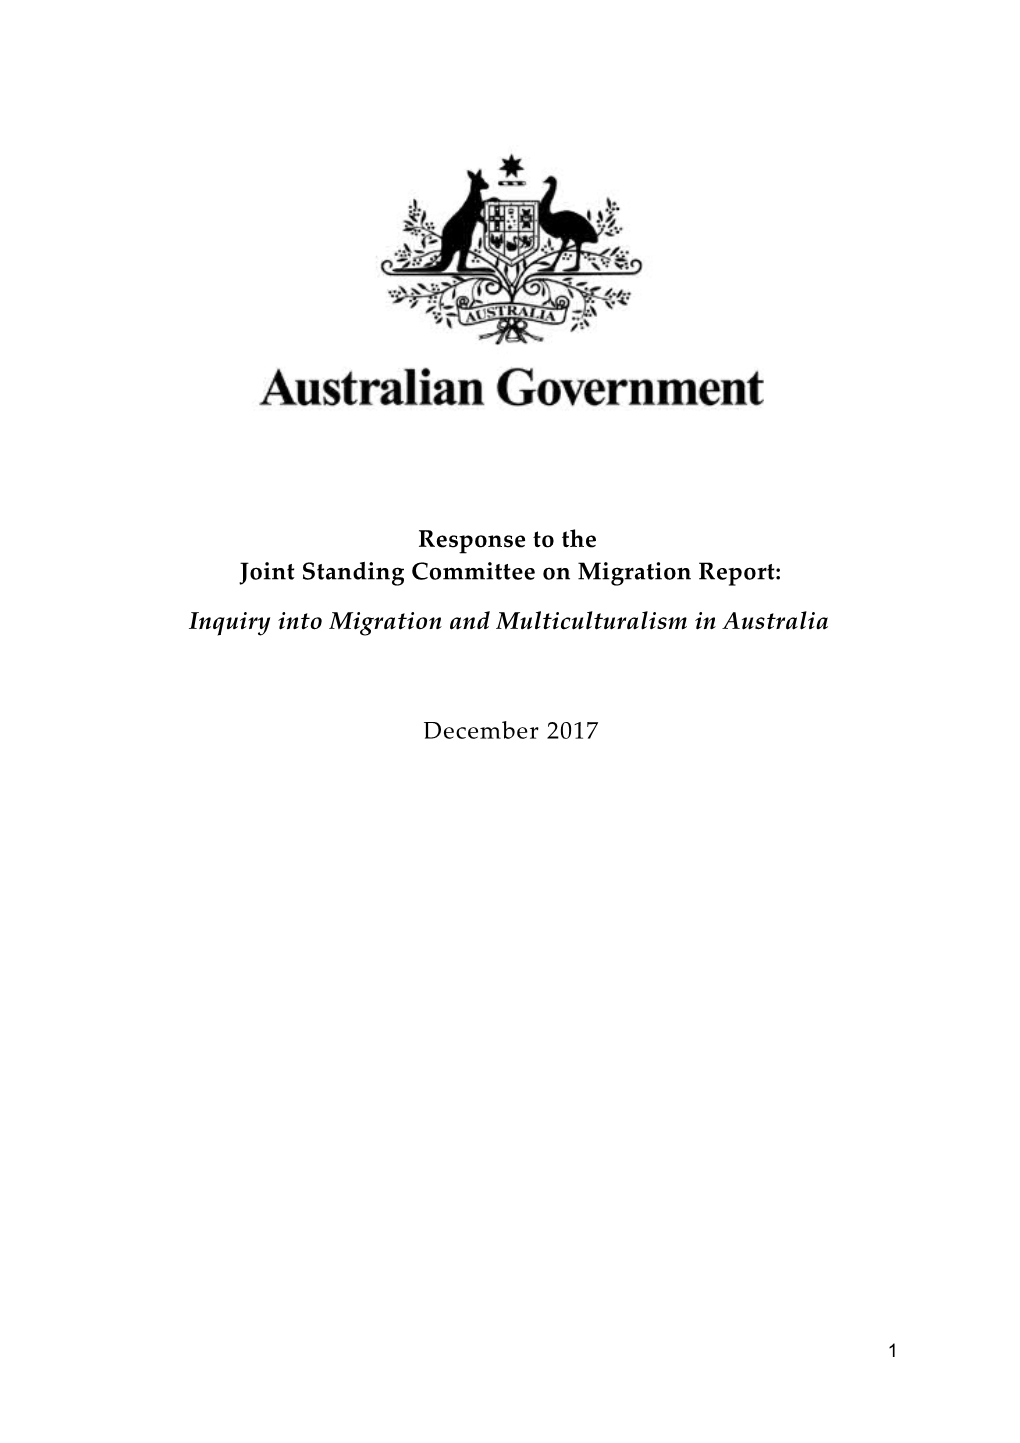 Inquiry Into Migration and Multiculturalism in Australia